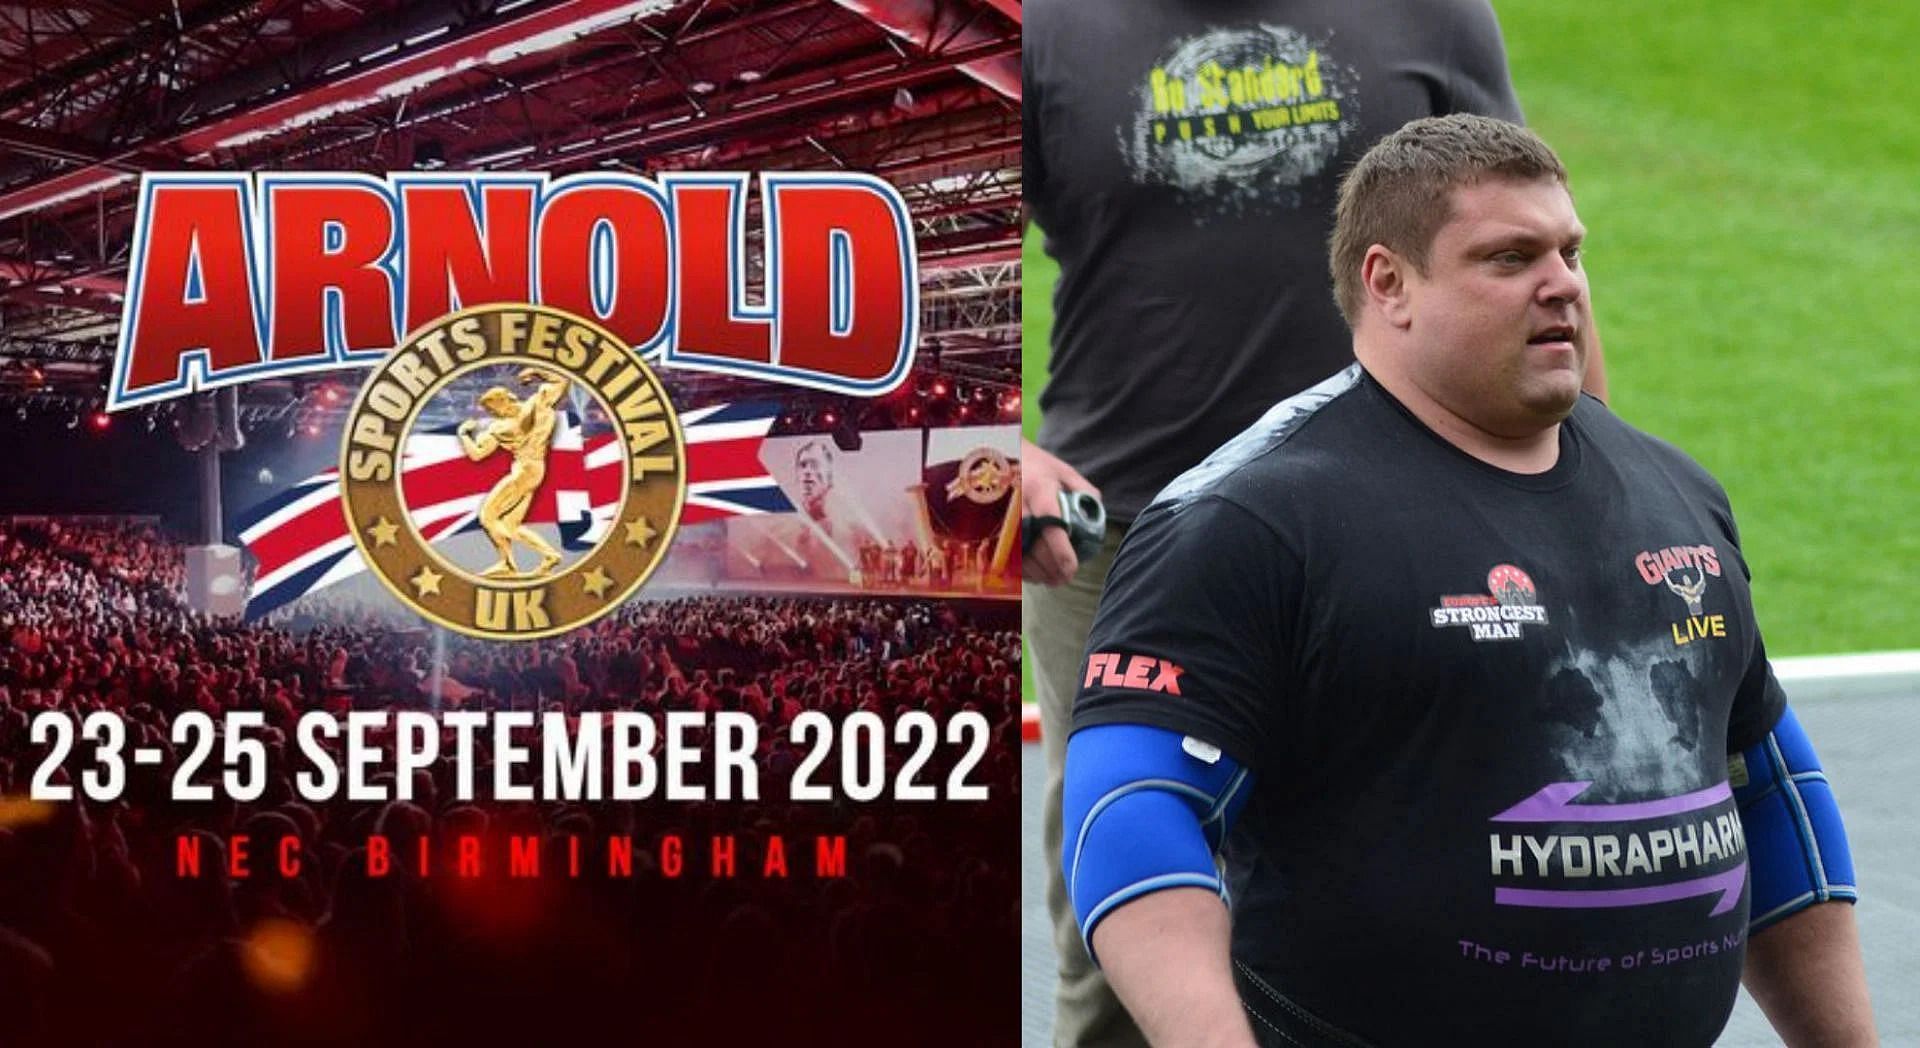 Mitchell Hooper Wins 2022 Arnold Strongman Classic Title